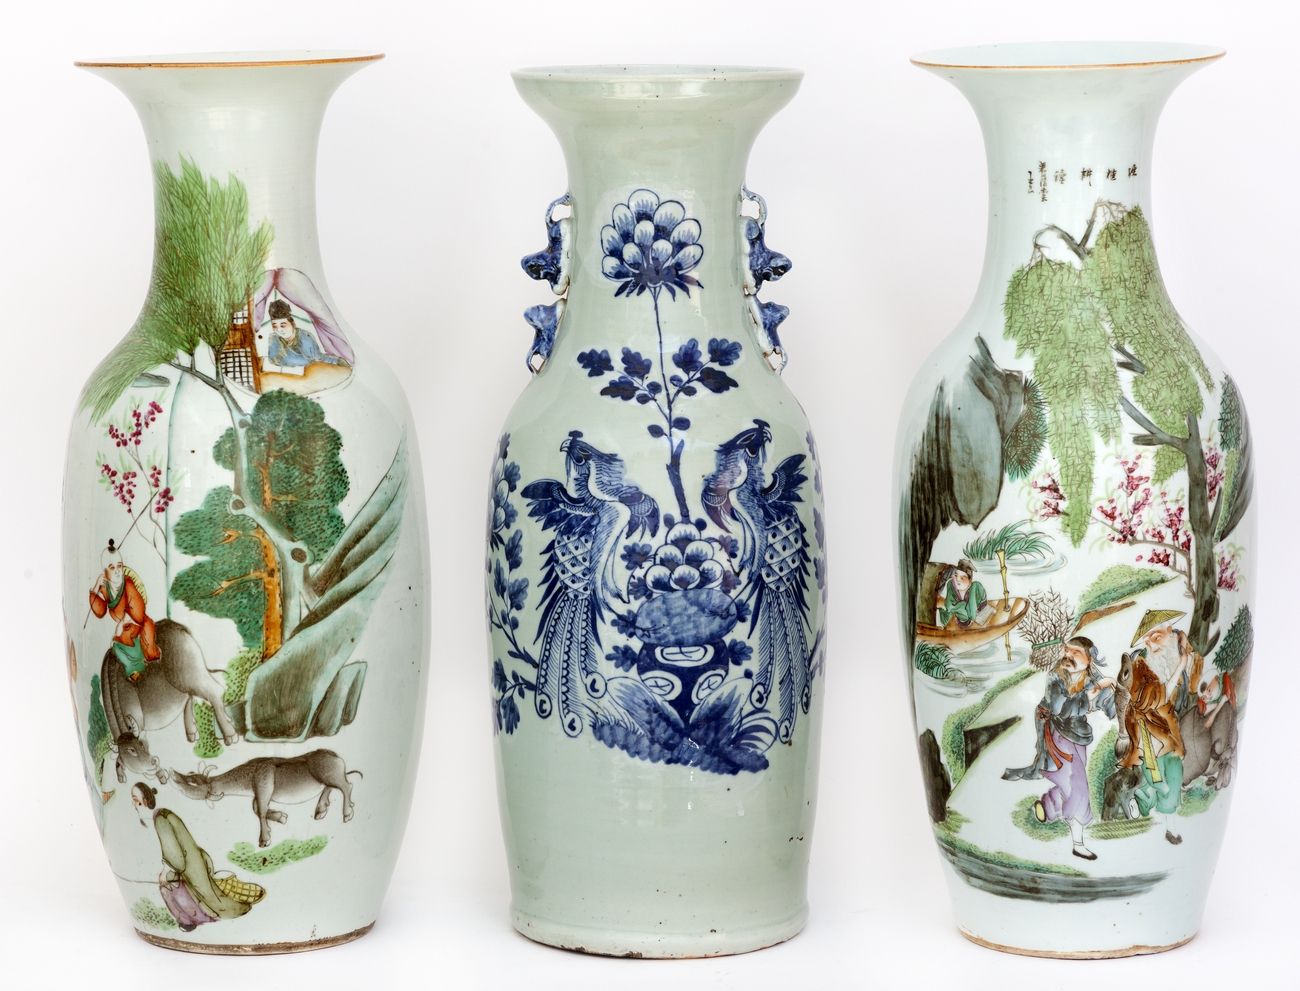 Null China, 19th-20th century
Lot comprising three porcelain vases with various &hellip;